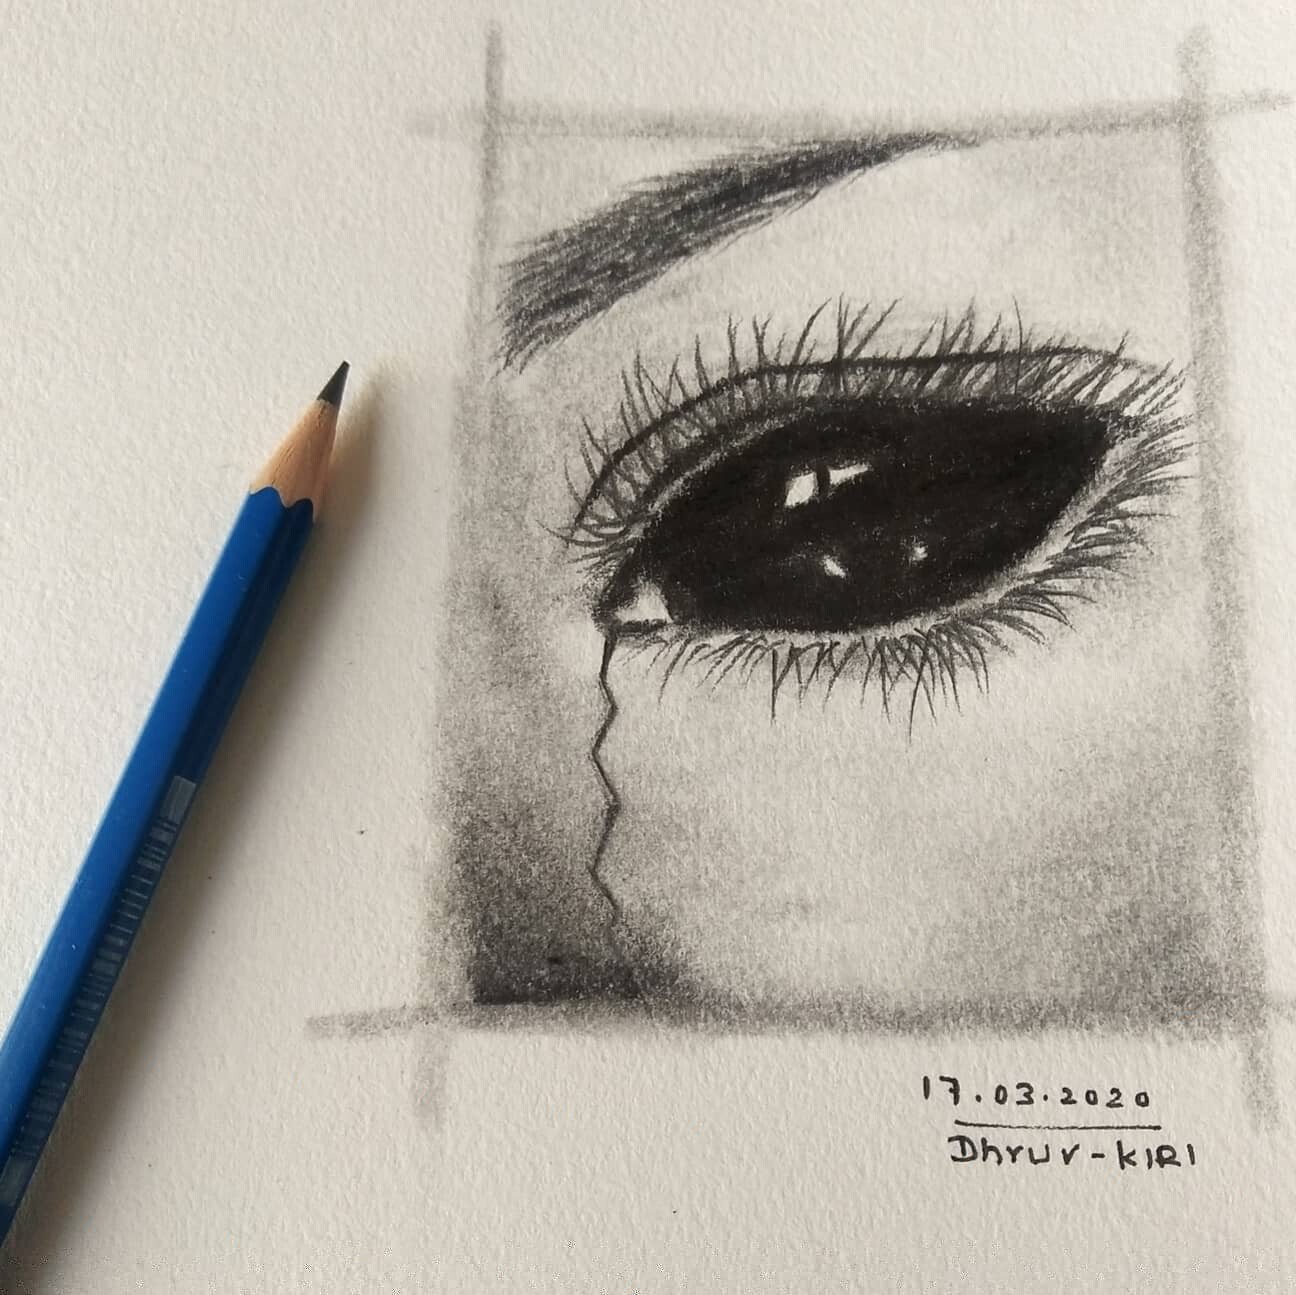 Scary Eyes Drawing